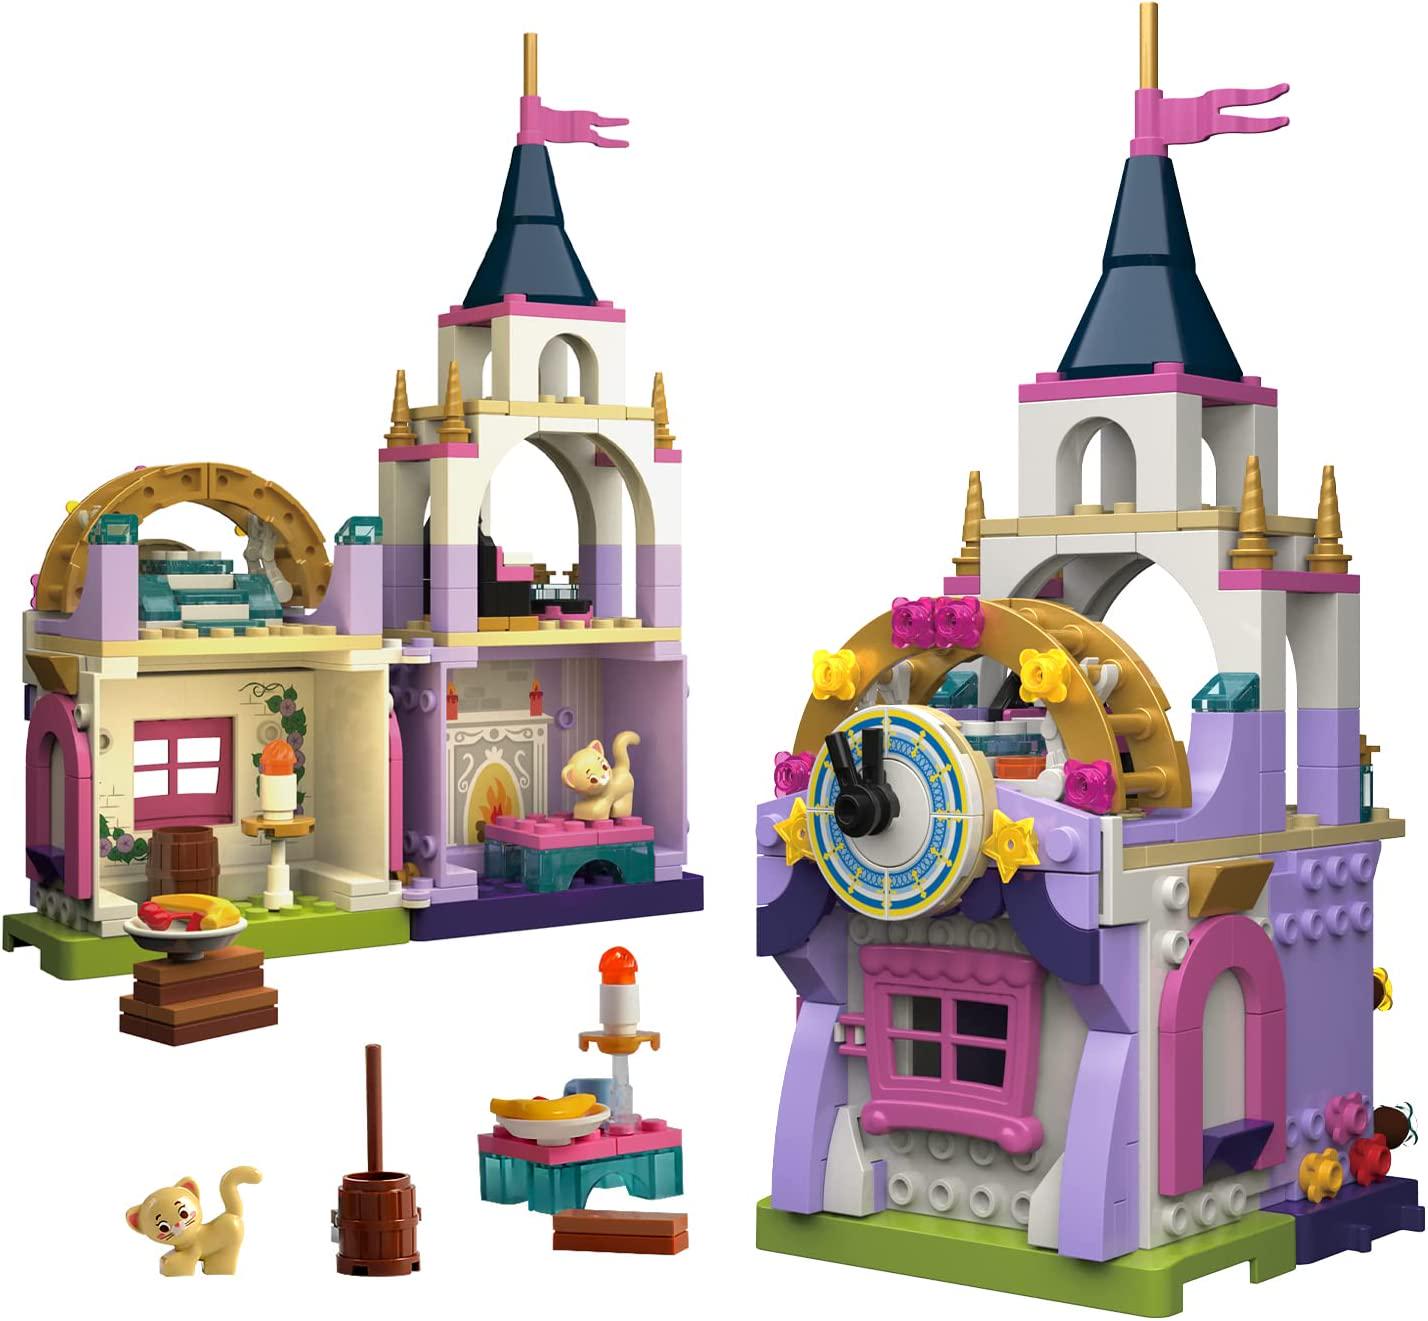 GEVINST, GEVINST Girls Princess Castle Building Blocks Set Toys, Palace Toy for Girls Constuction Bricks, Birthday Gifts for Girls Age 6-12, New 2022, 271PCS